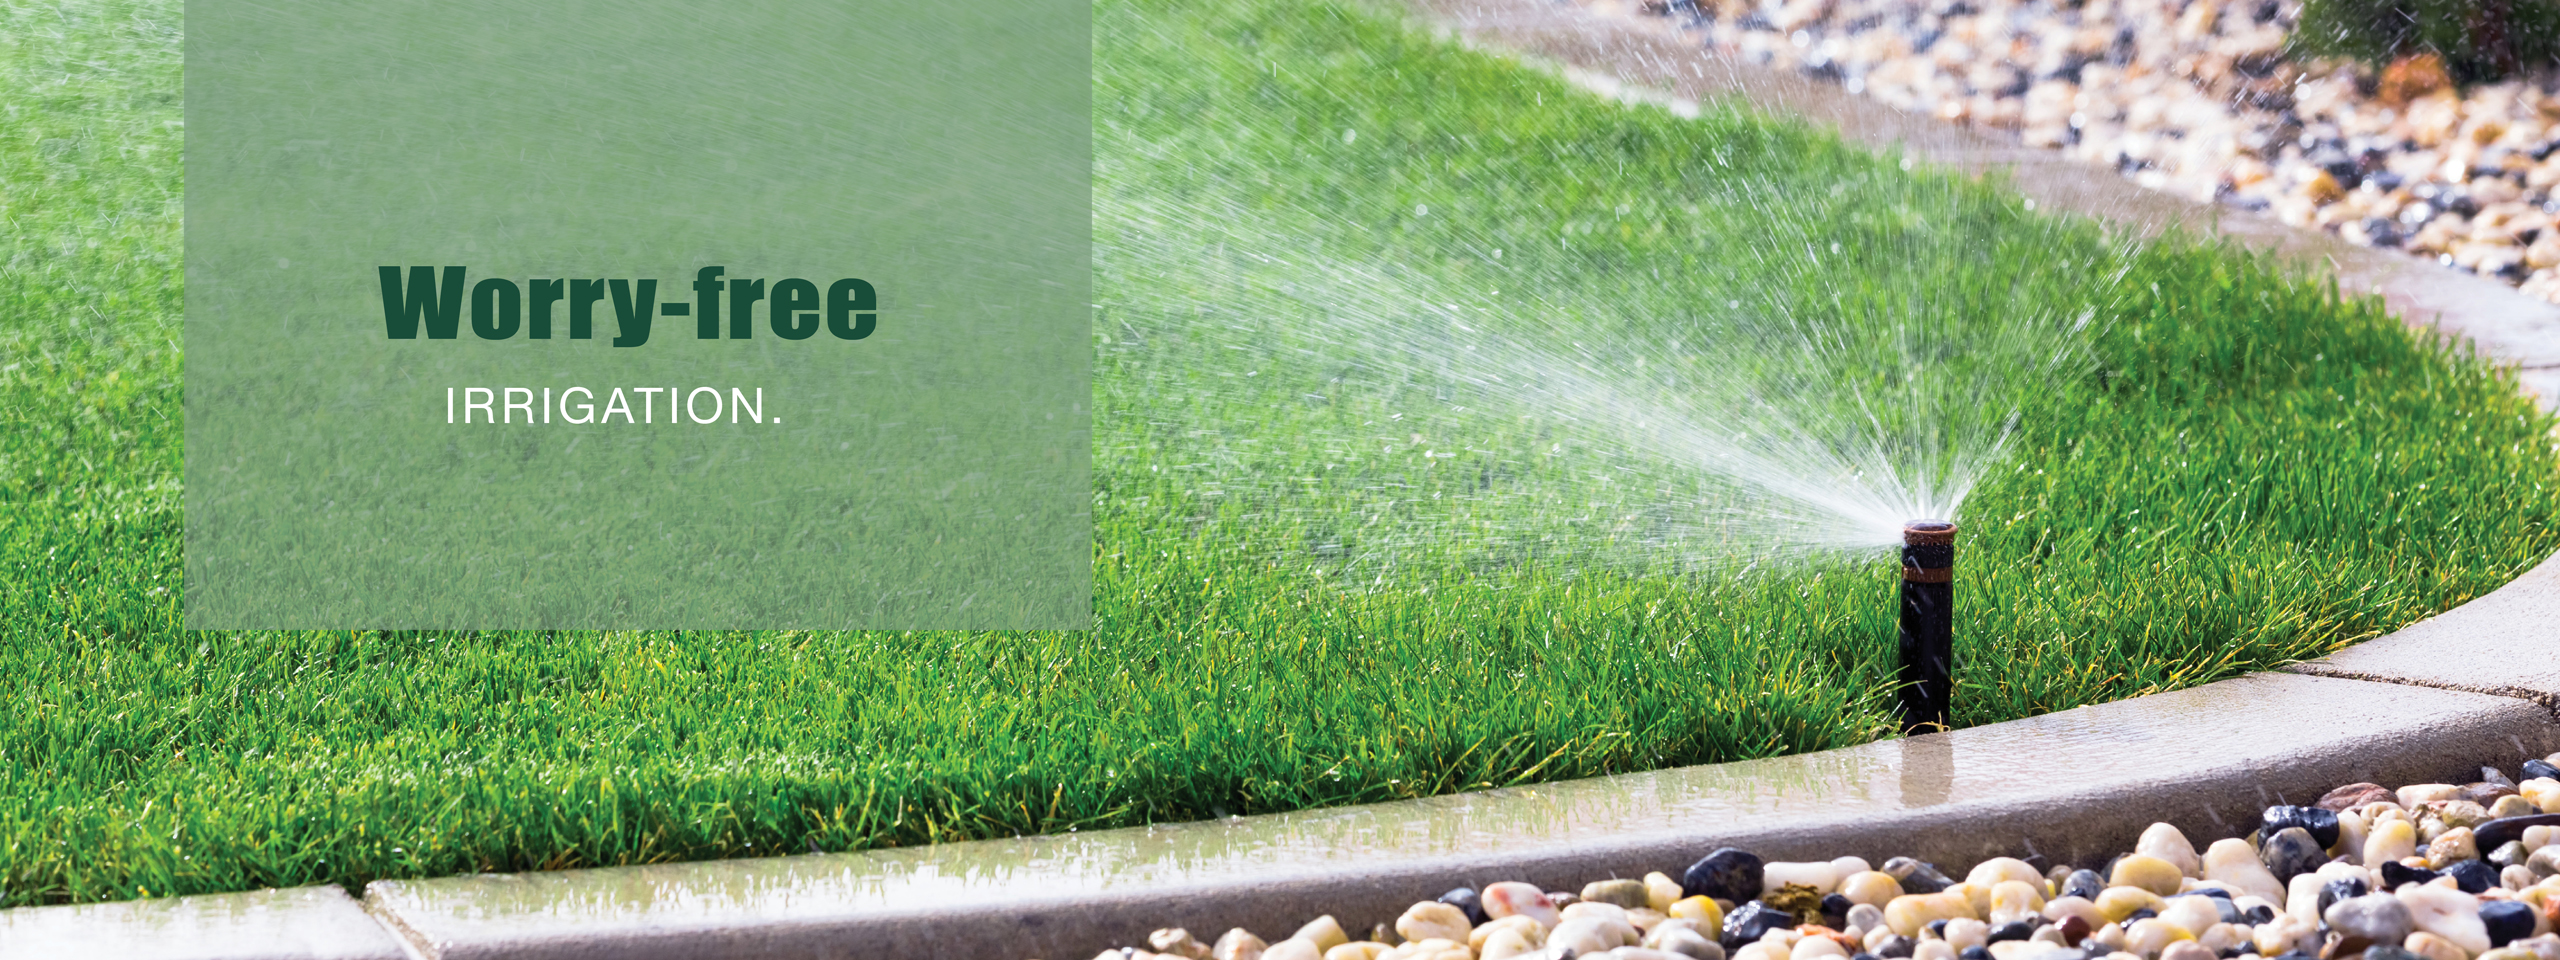 US Lawn and Landscape Irrigation Services